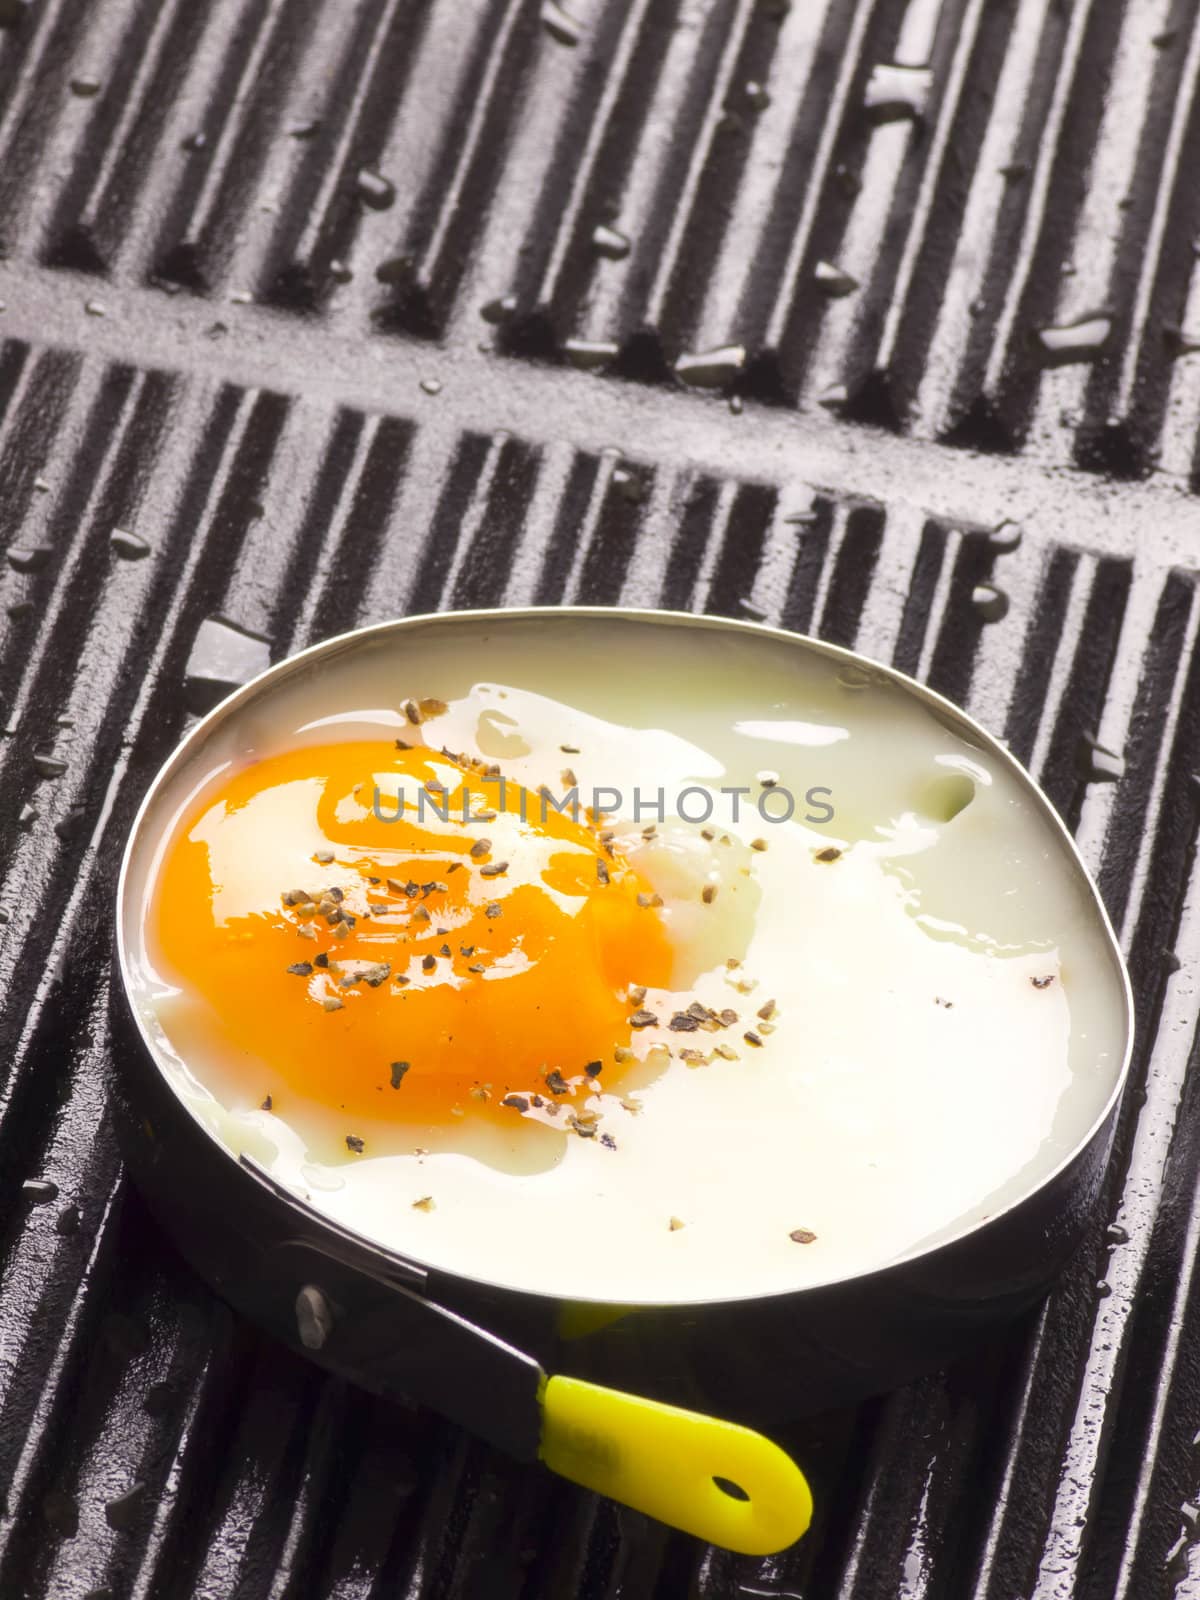 close up of fried egg on a grill